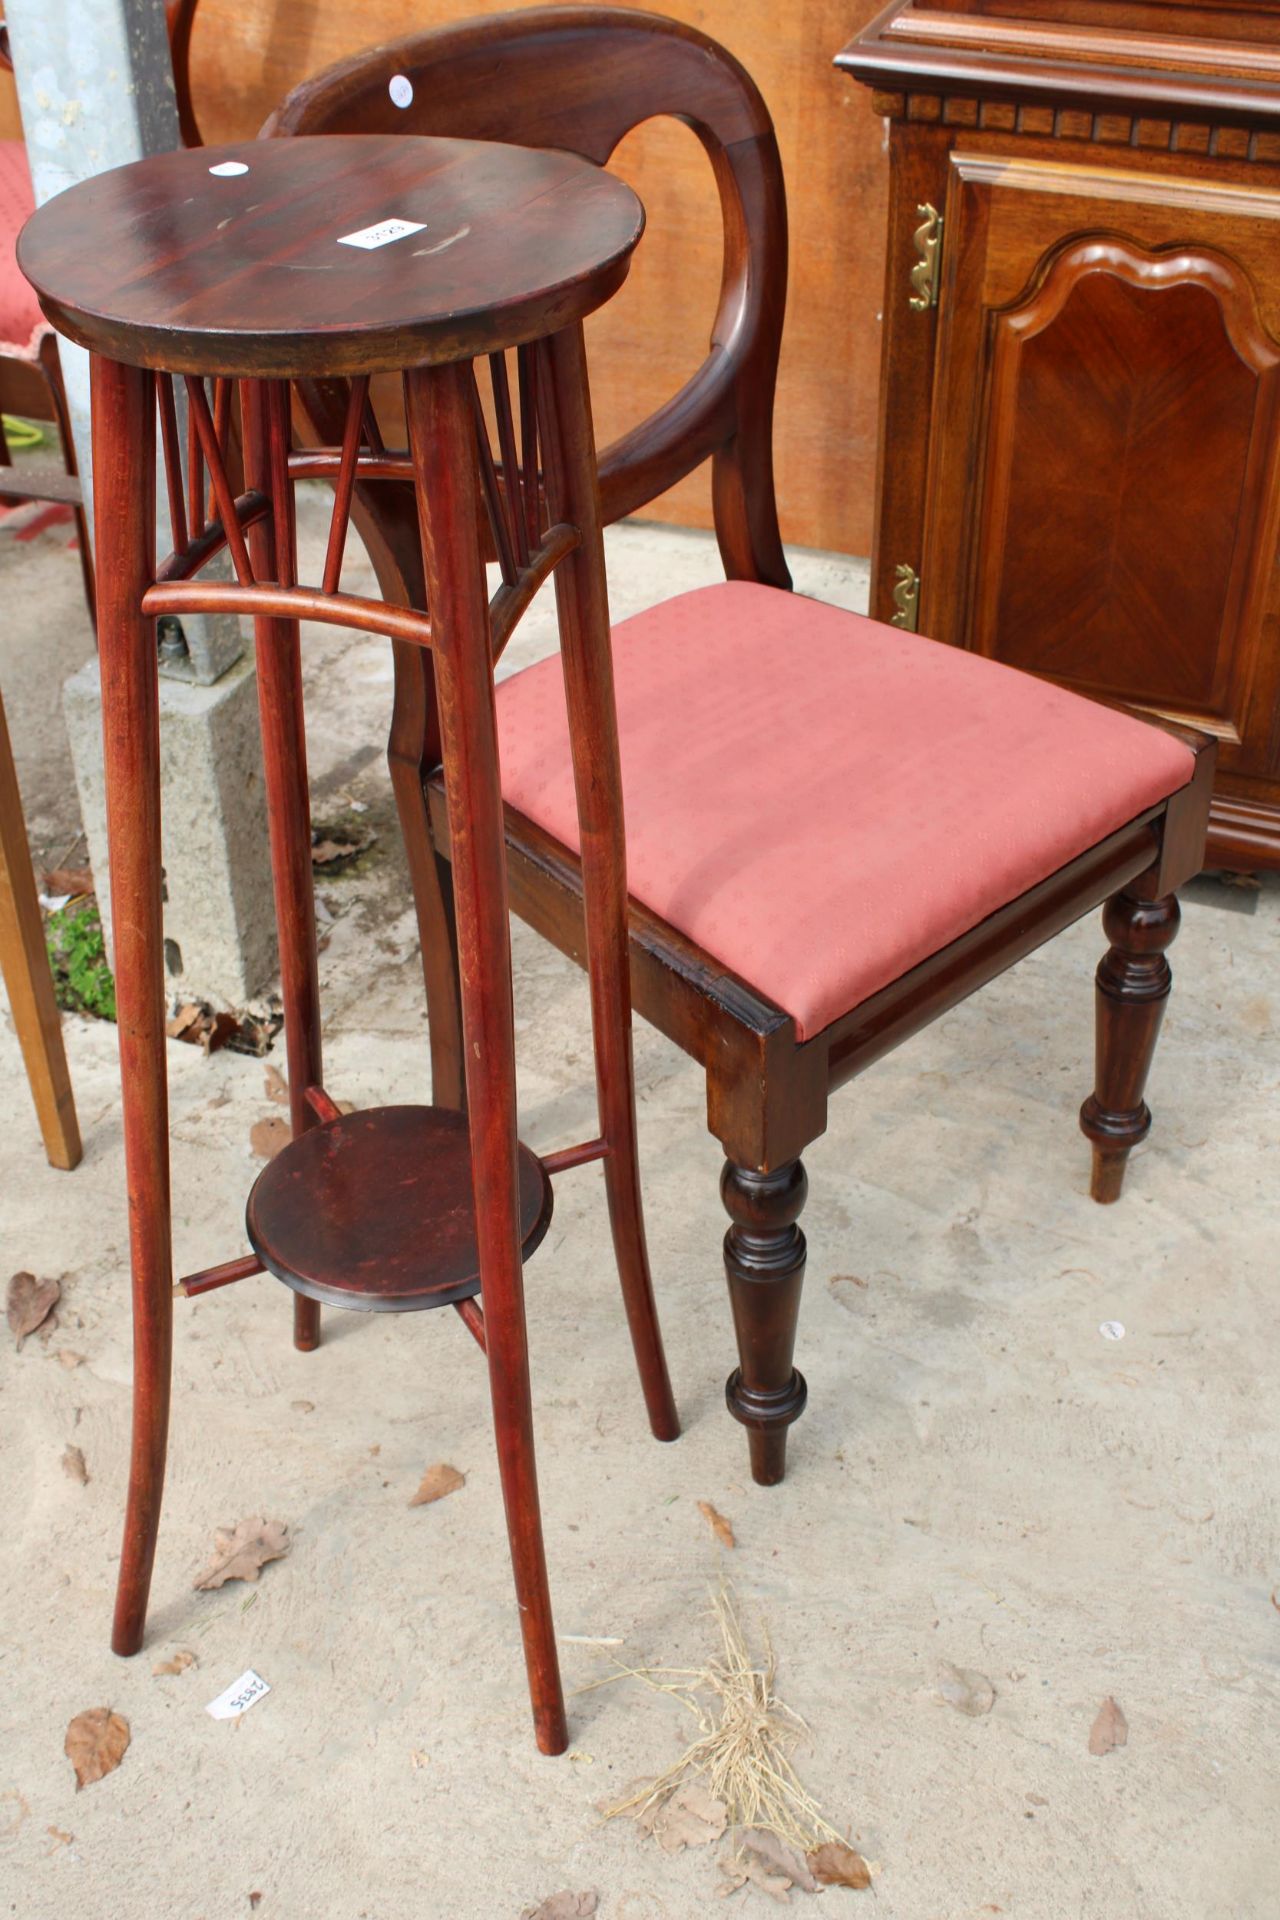 A VICTORIAN MAHOGANY DINING CHAIR AND A TWO TIER BENTWOOD STYLE JARDINIERE STAND - Image 2 of 2